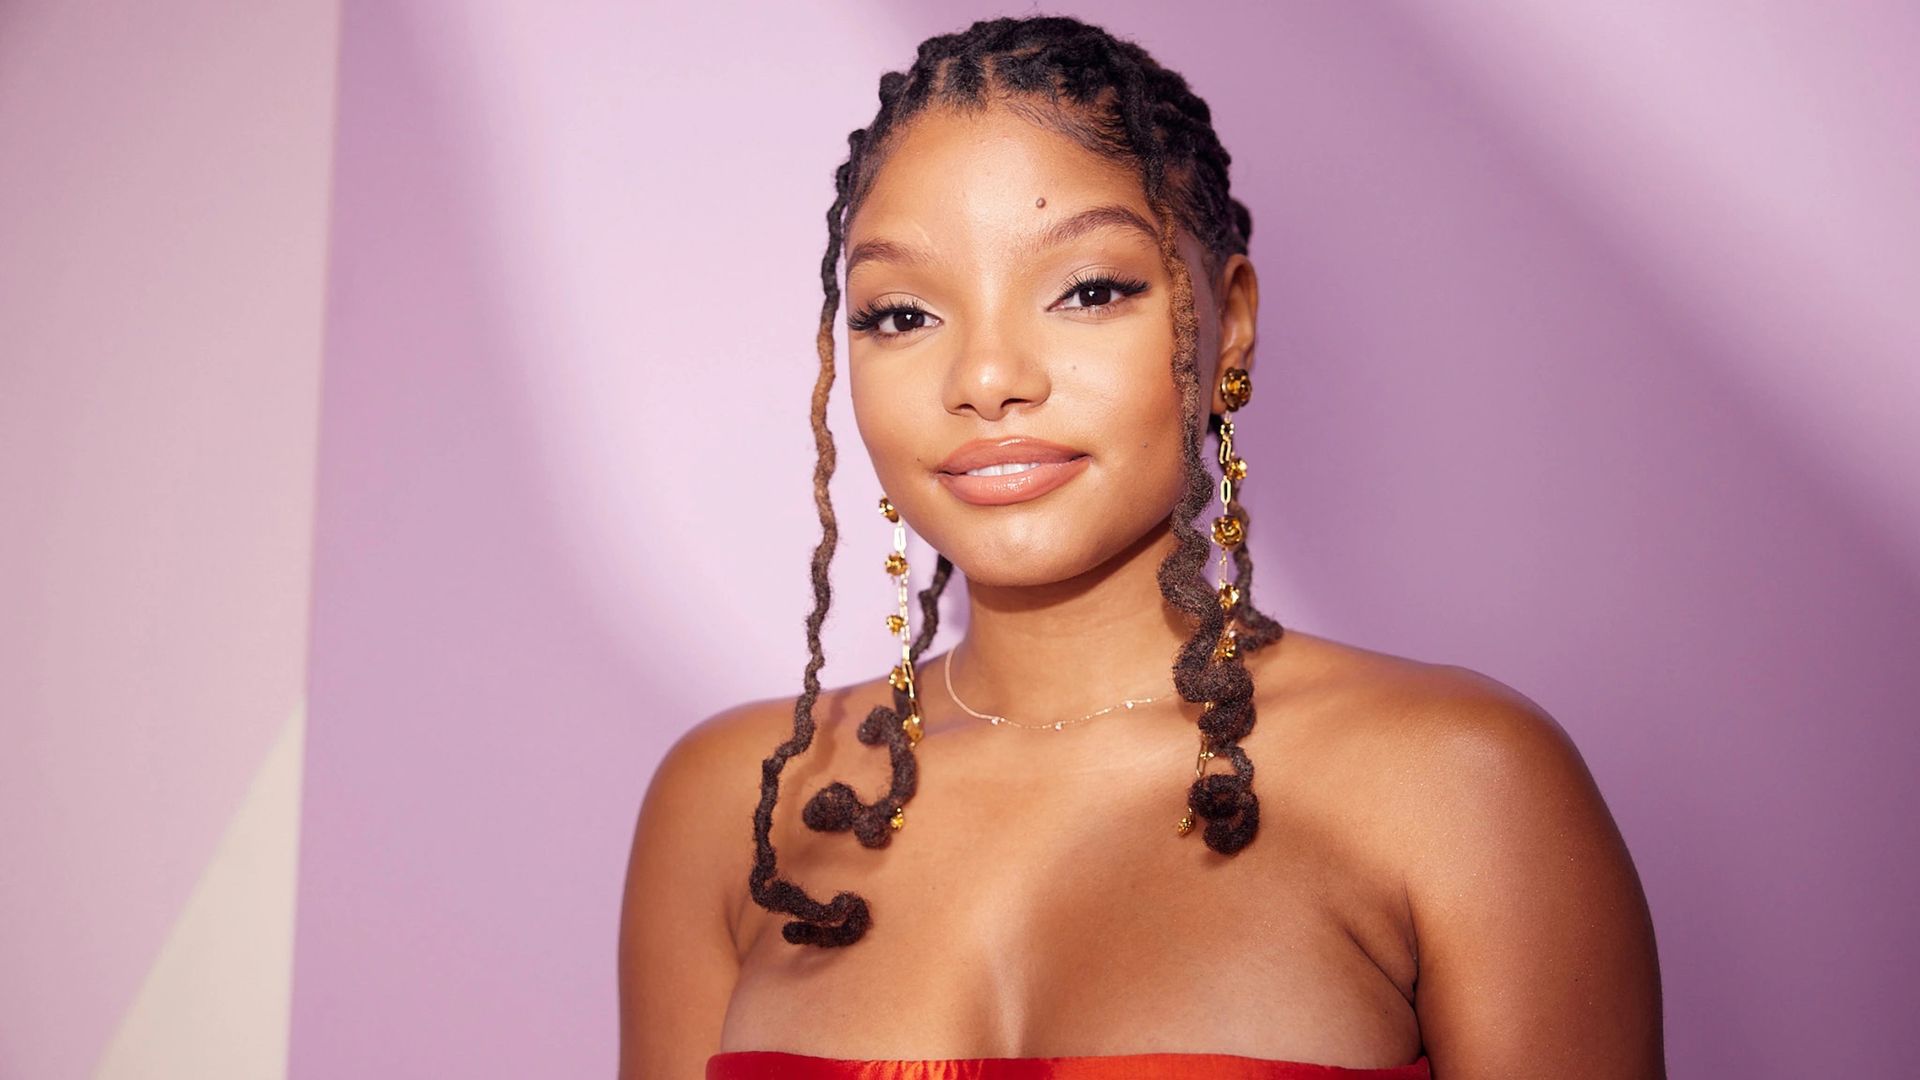 Actress and singer Halle Bailey